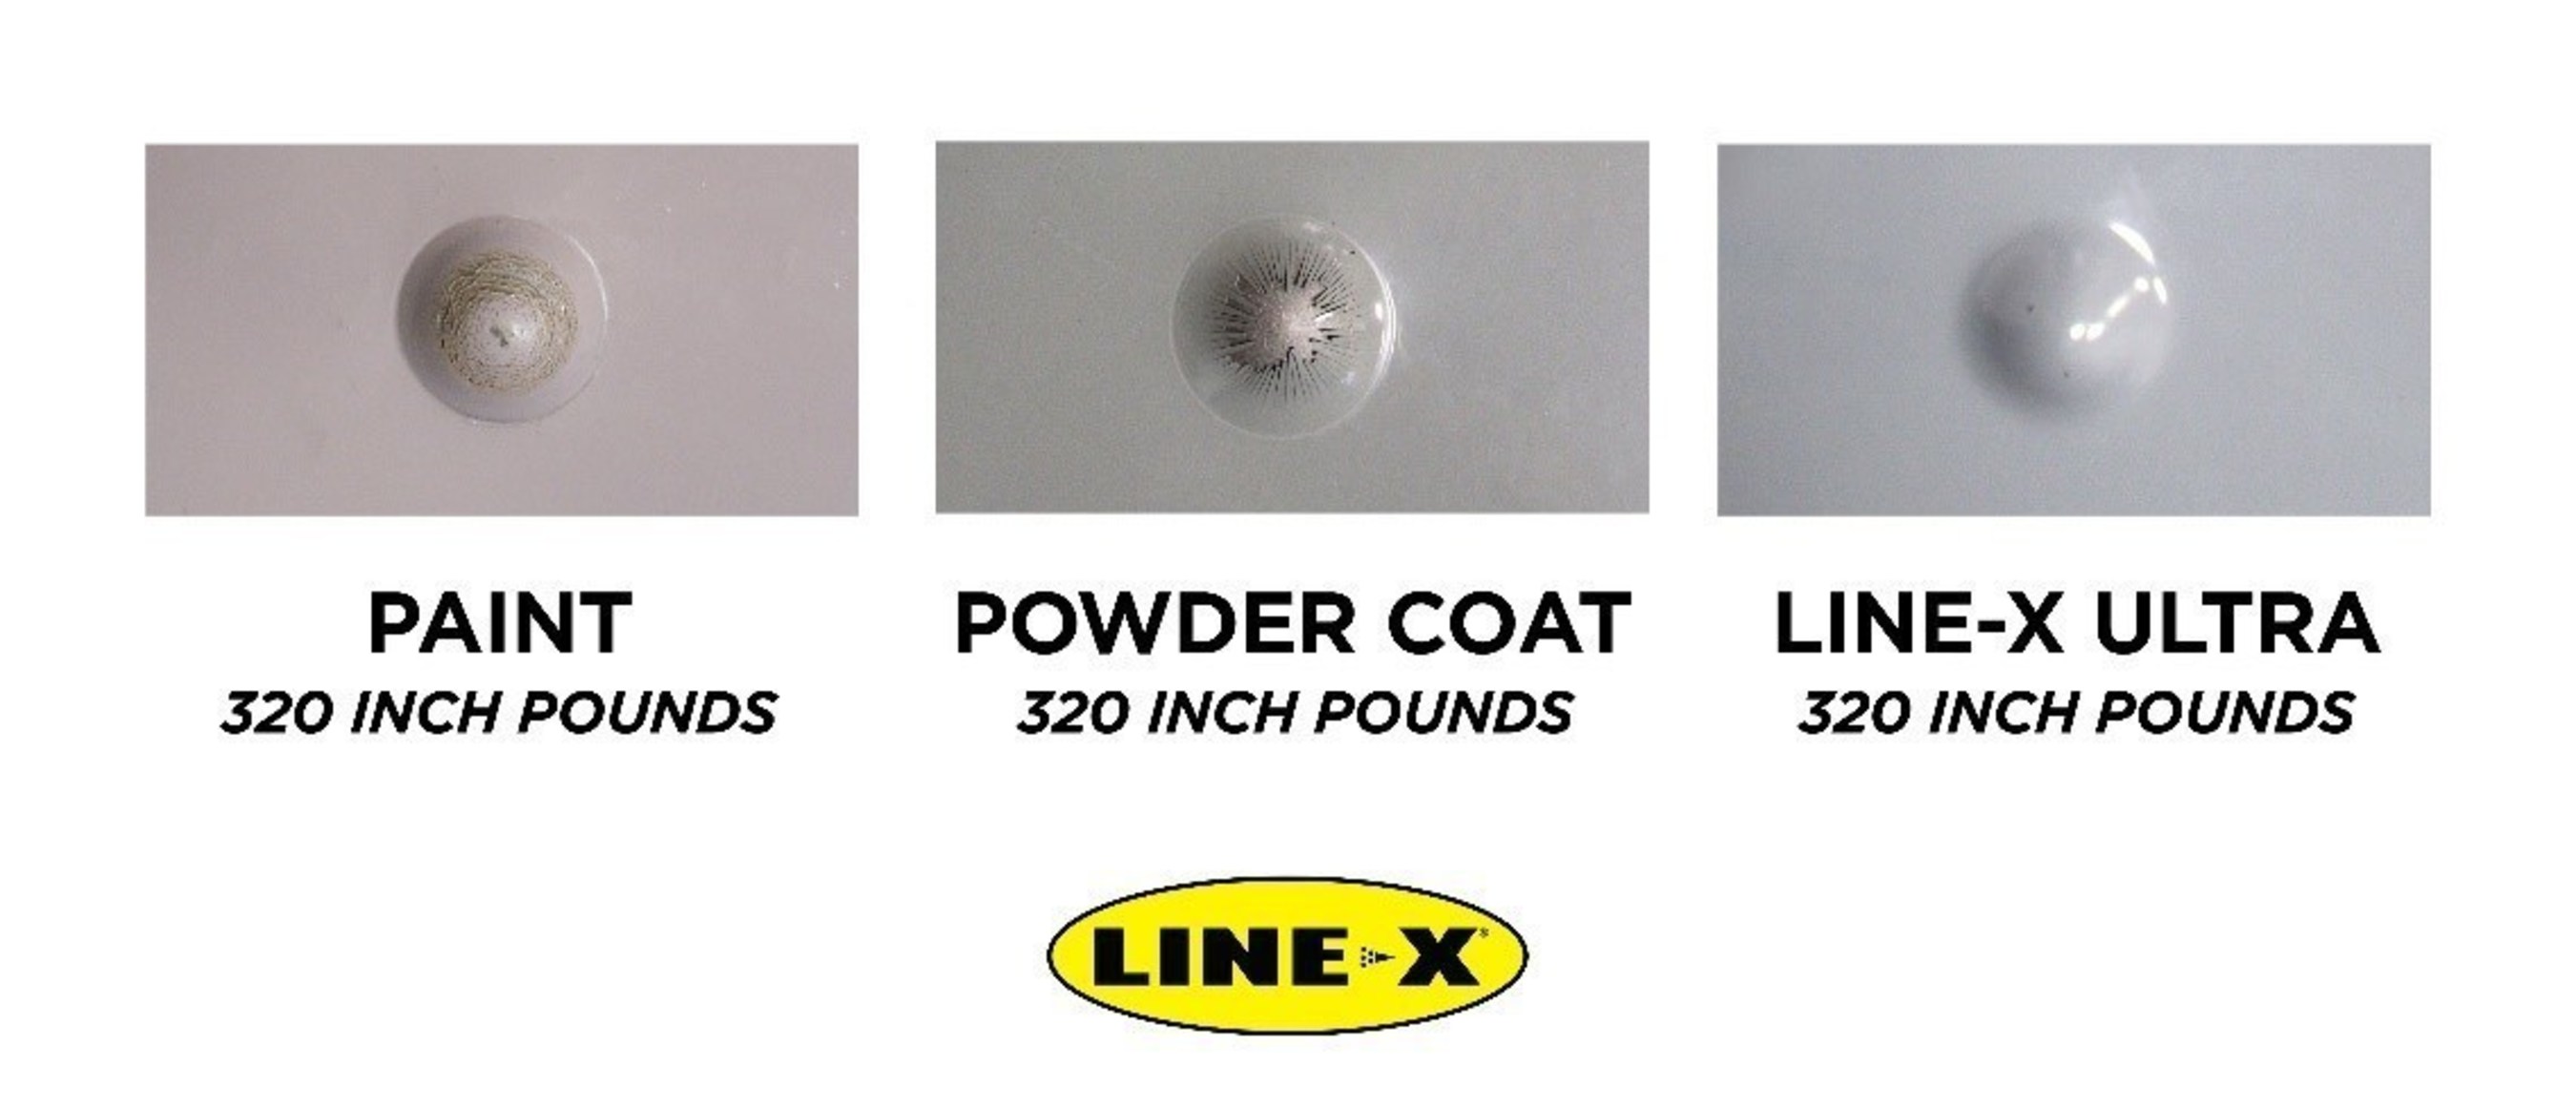 MORE DURABLE THAN POWDER COAT, INDUSTRIAL PAINT. In impact tests, LINE-X ULTRA outperformed industrial paint and powder coat.